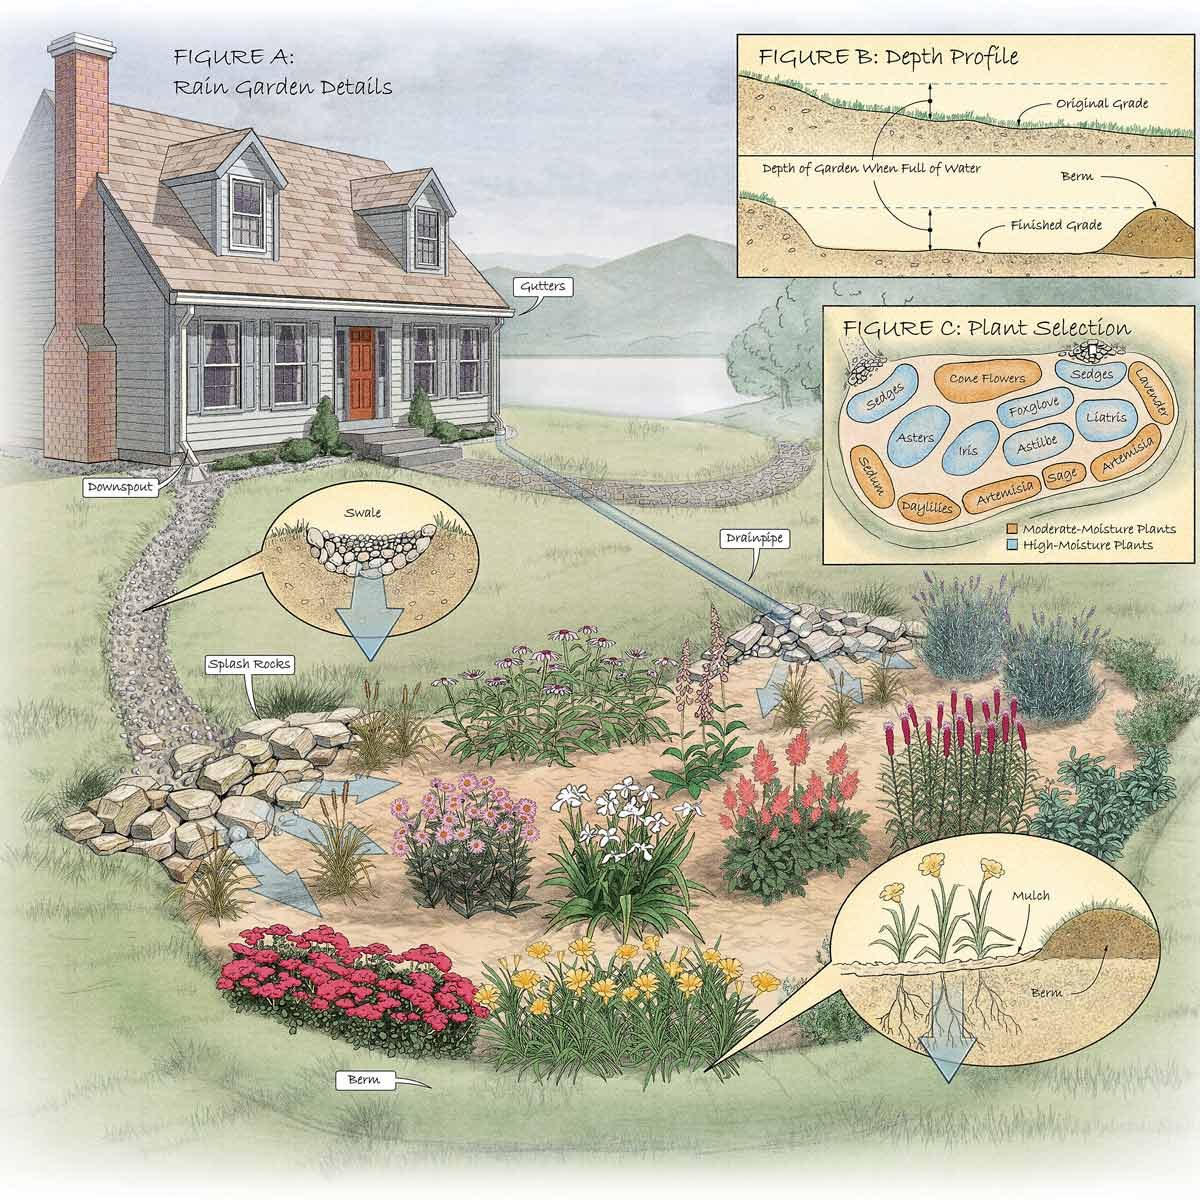 What is a Rain Garden and How to Build One in Your Yard